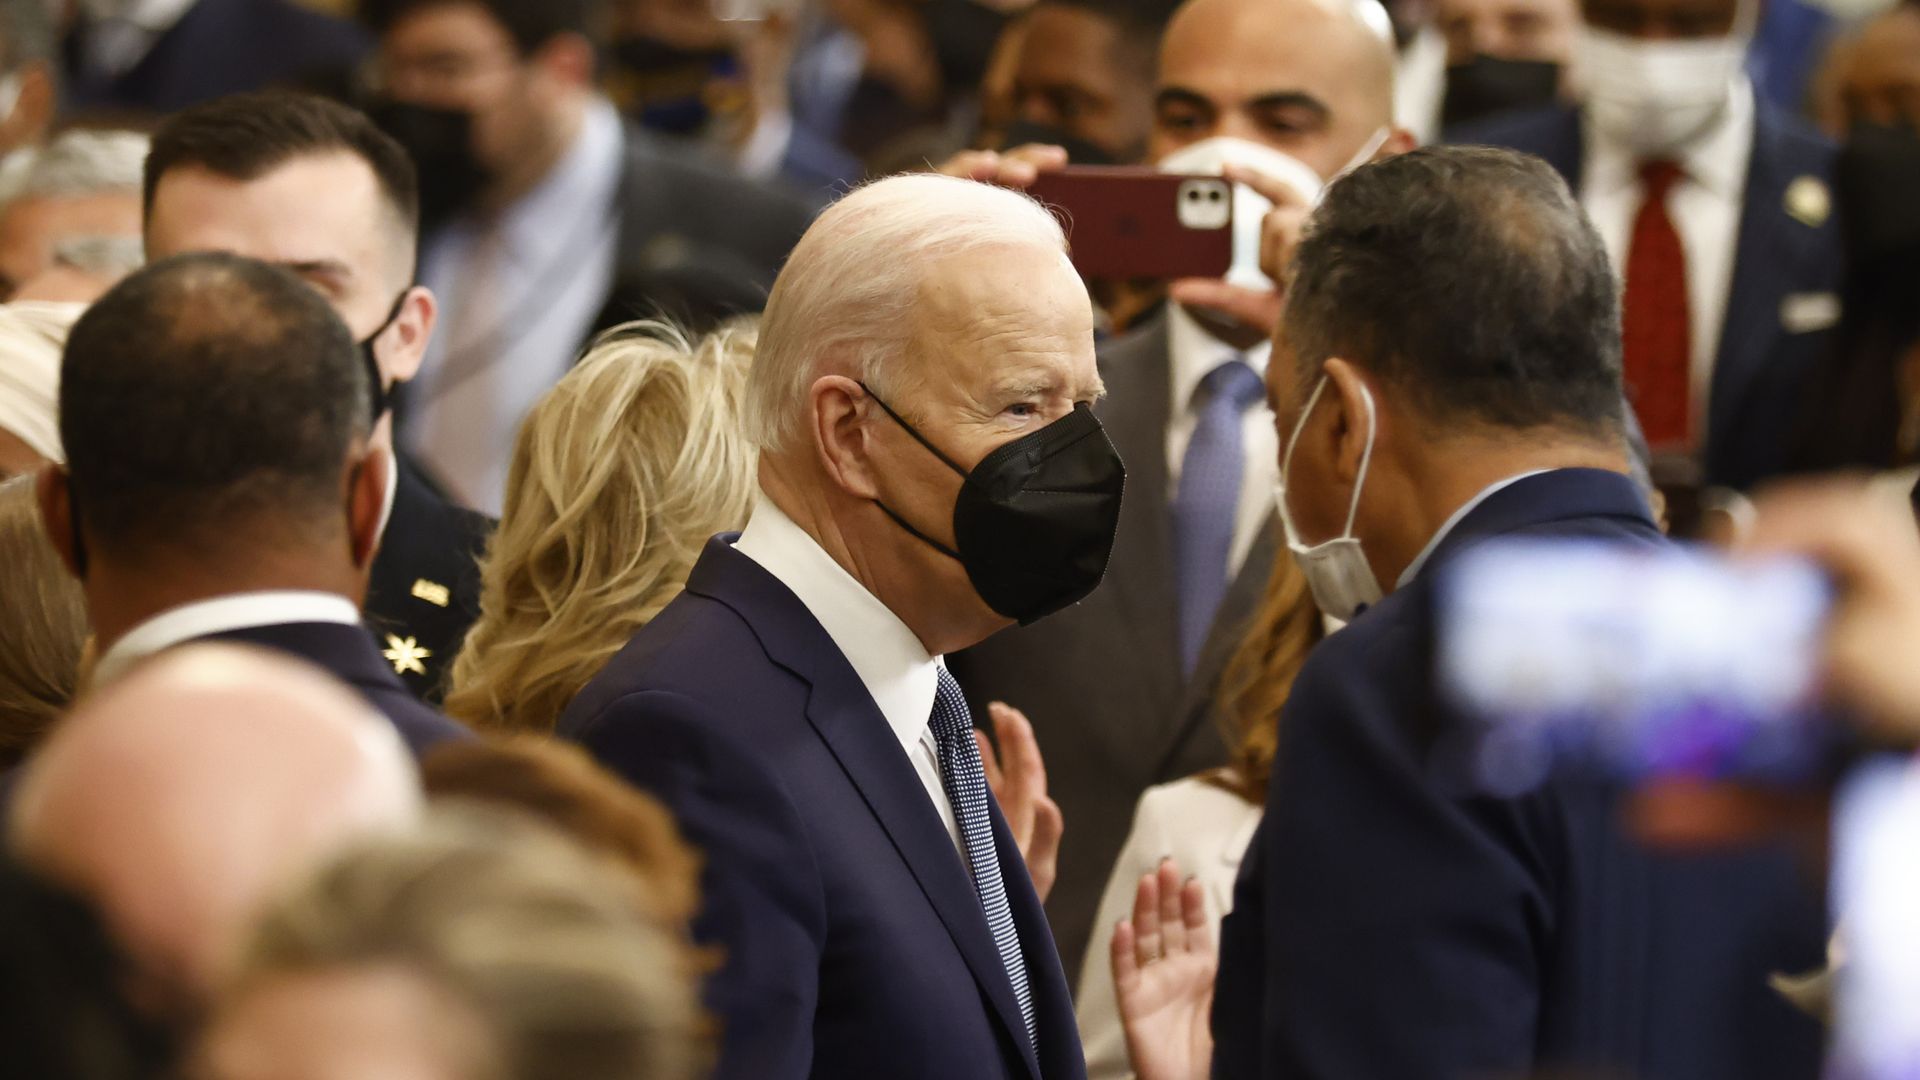 Photo of Joe Biden in a mask in a White House chamber surrounded by people